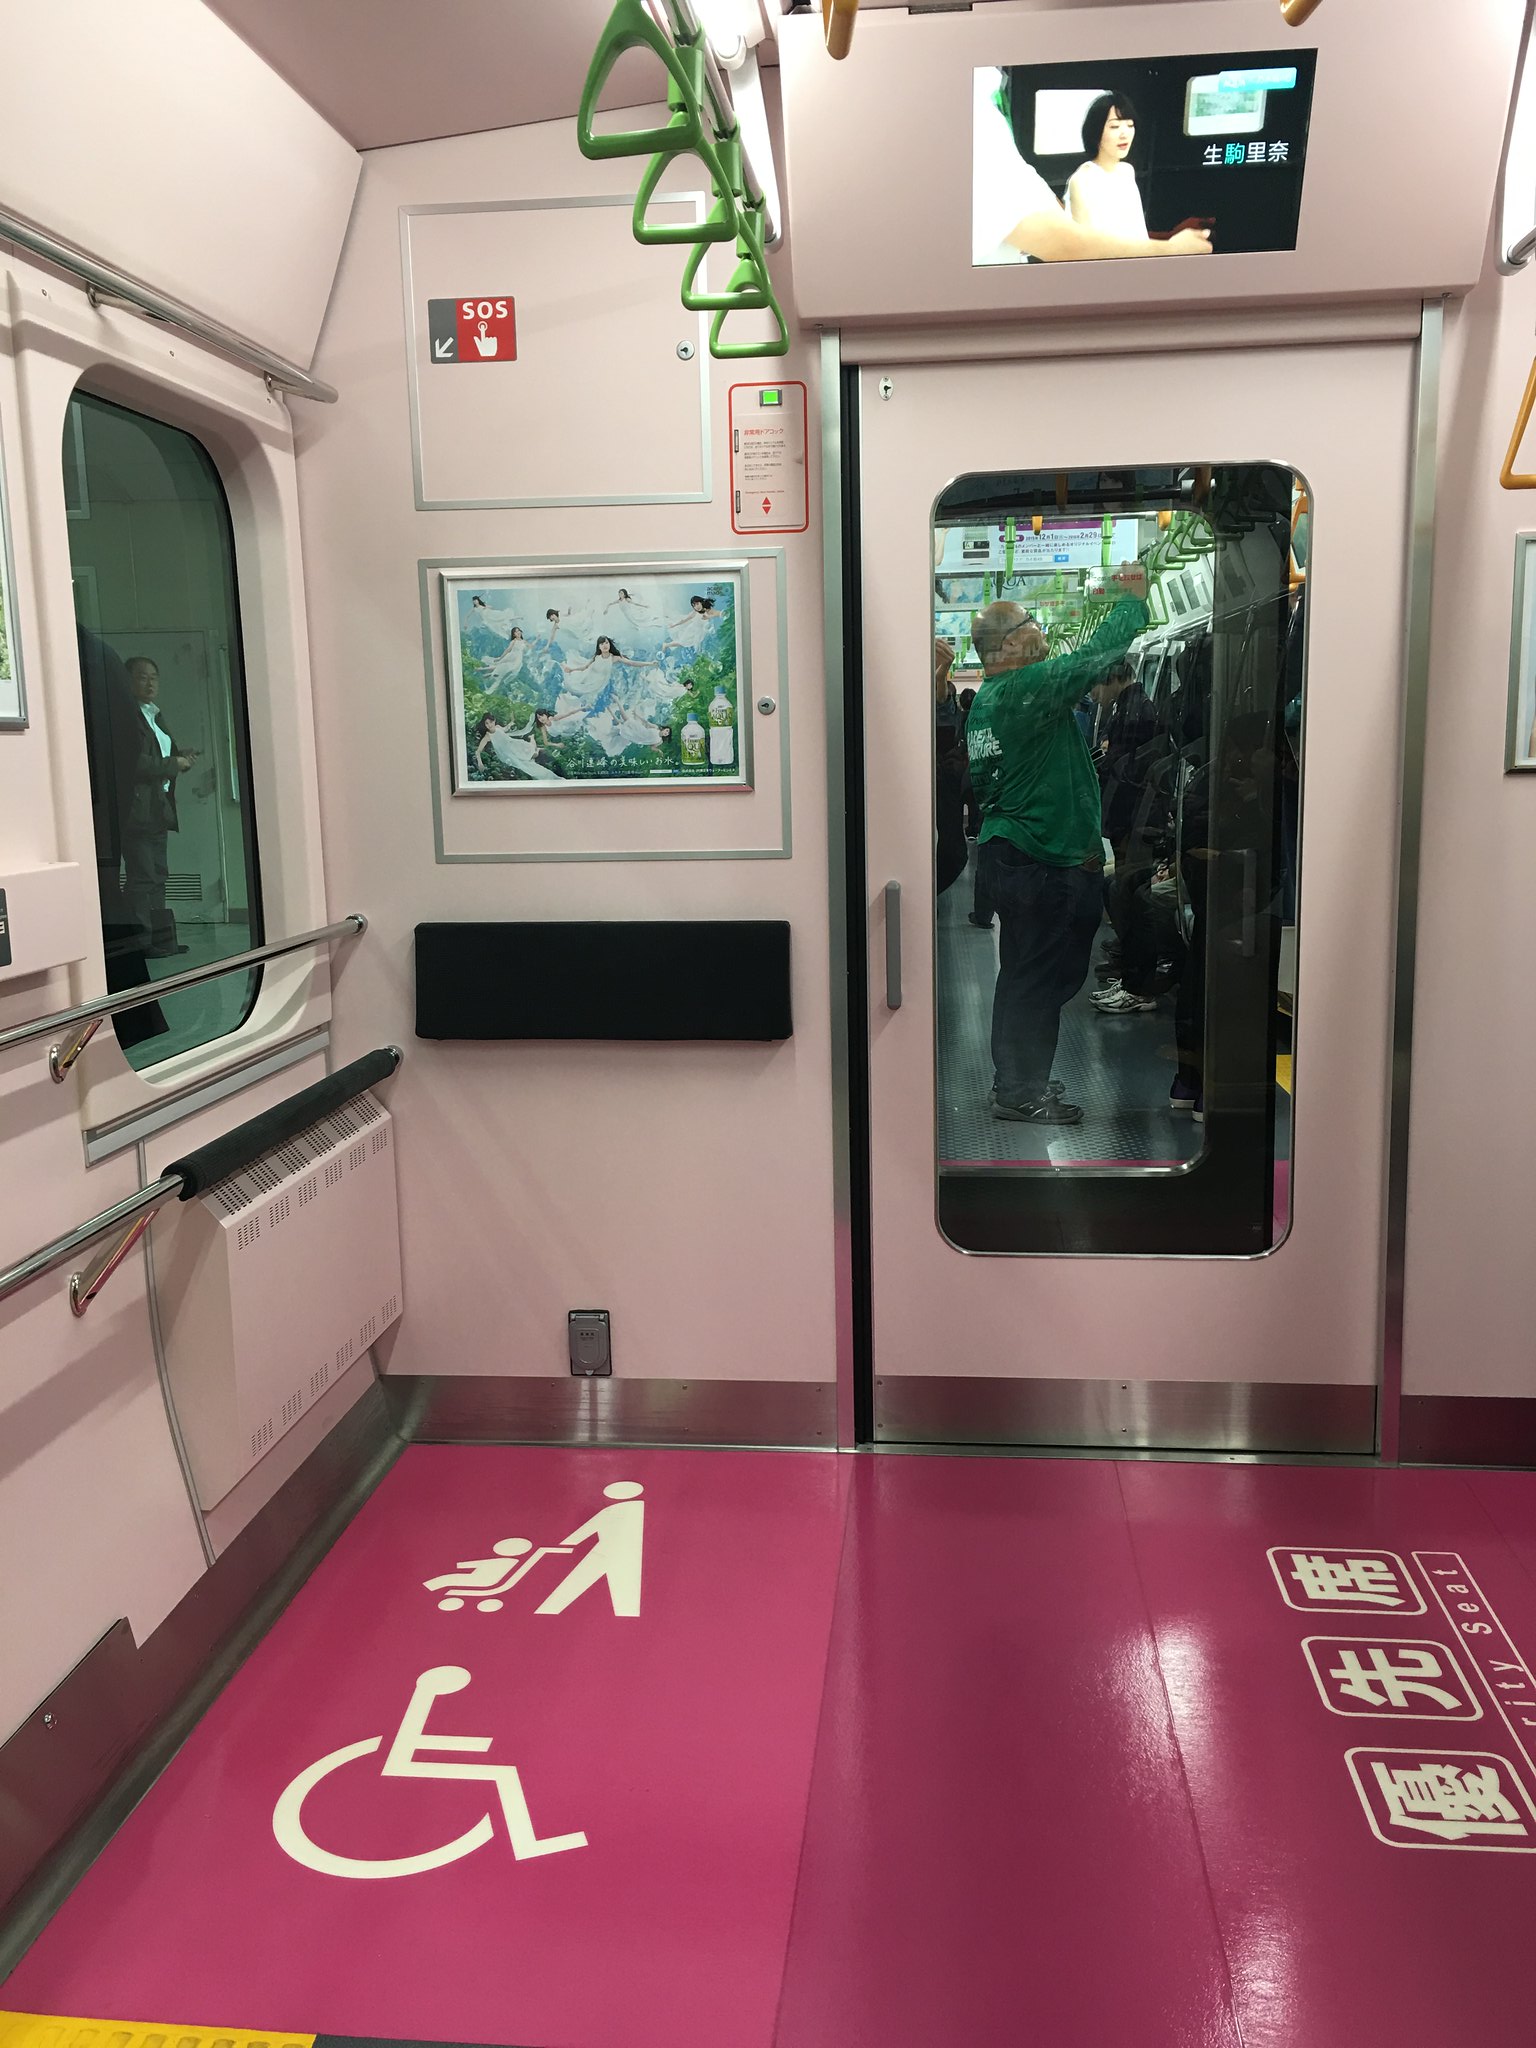 https://experiencetokyo.net/spotted-the-new-e235-jr-yamanote-line-train-on-a-test-run/